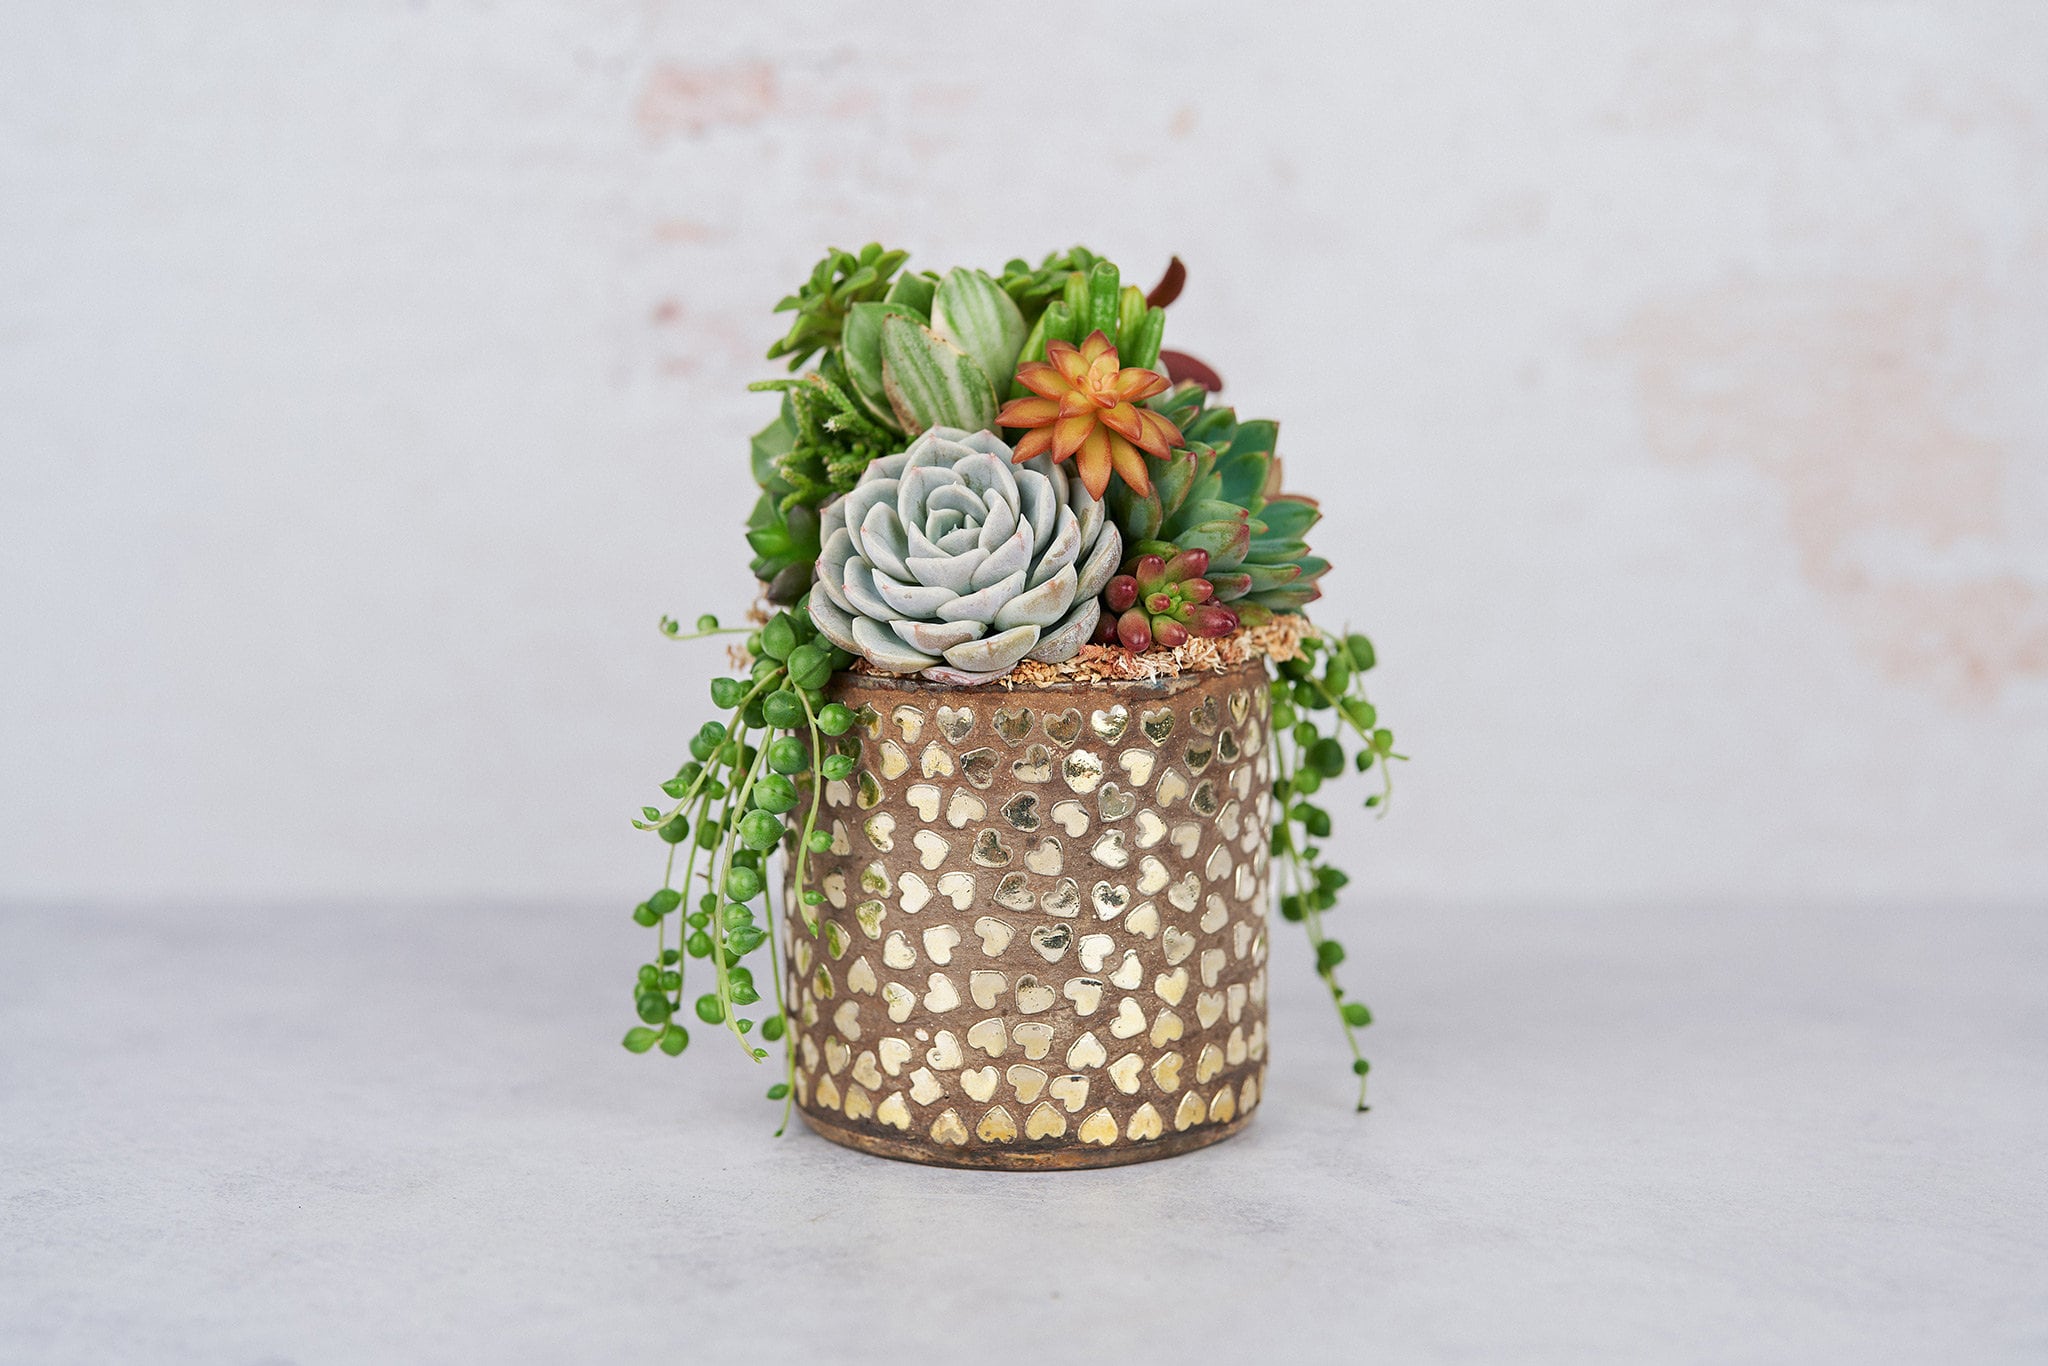 Hammered Hearts Living Succulent Arrangement Gift | Birthday, Celebration, House Warming Living Gift for Plant Lovers | Gift for Mom